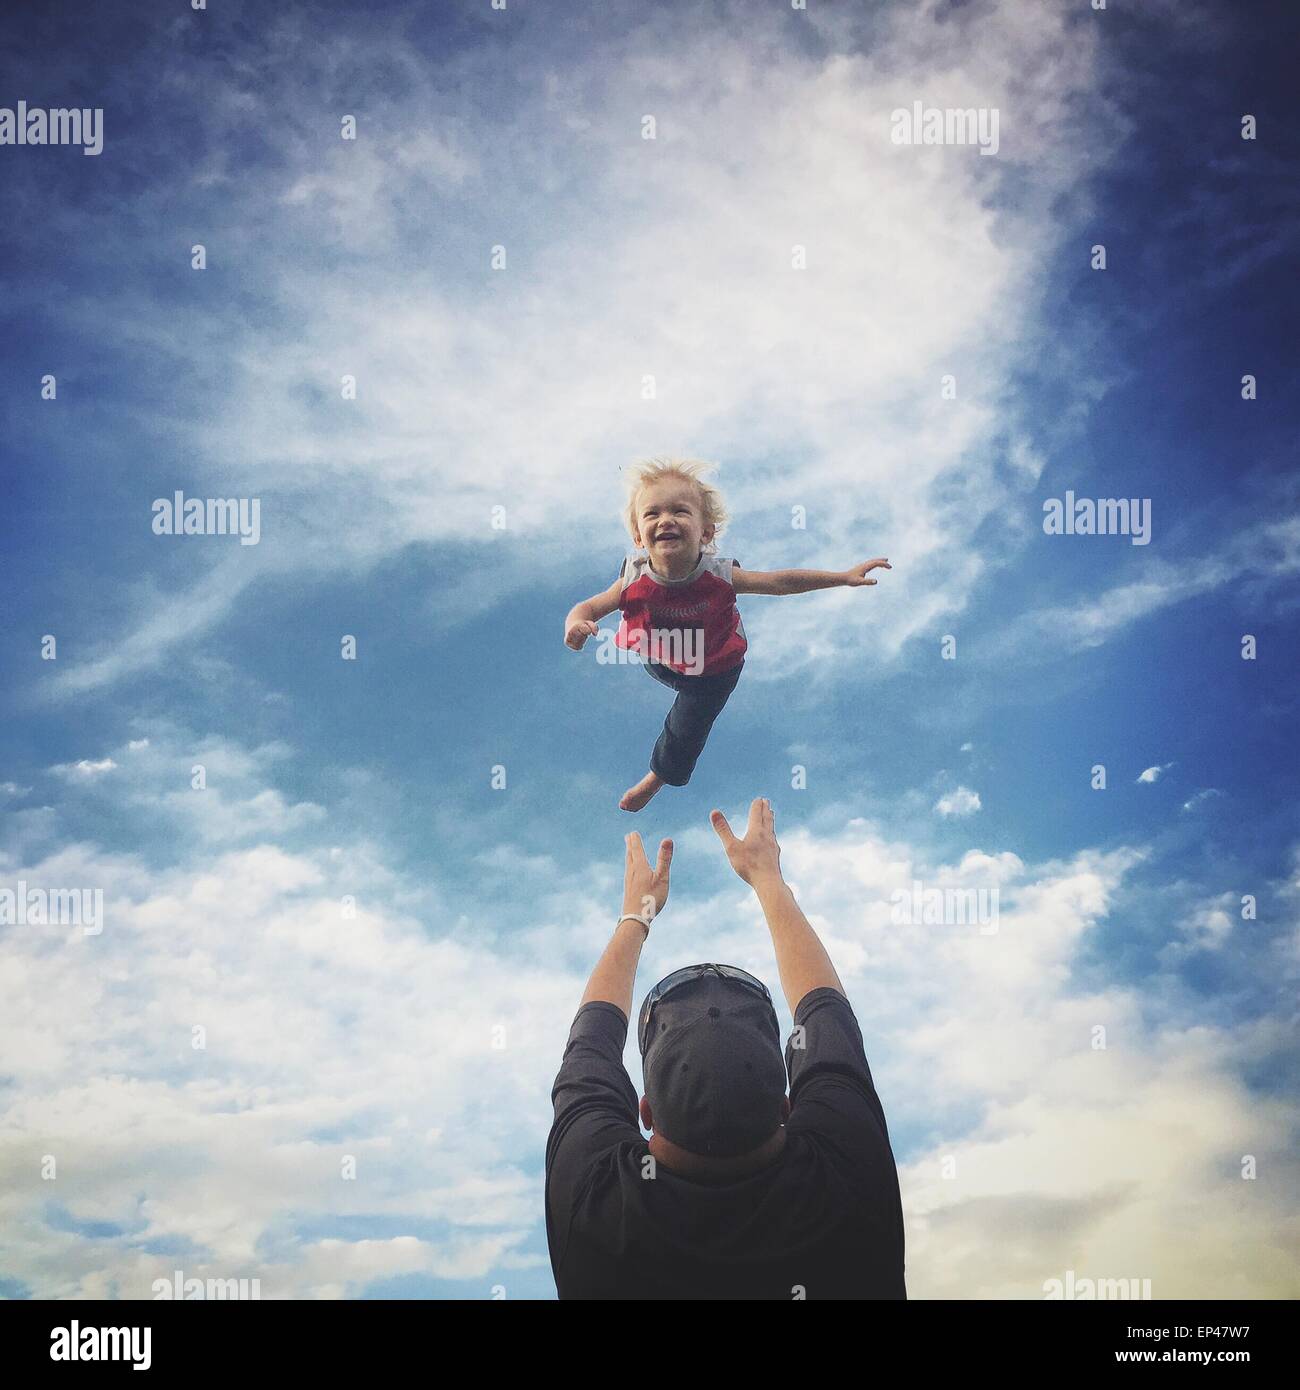 Father throwing his son in the air Stock Photo